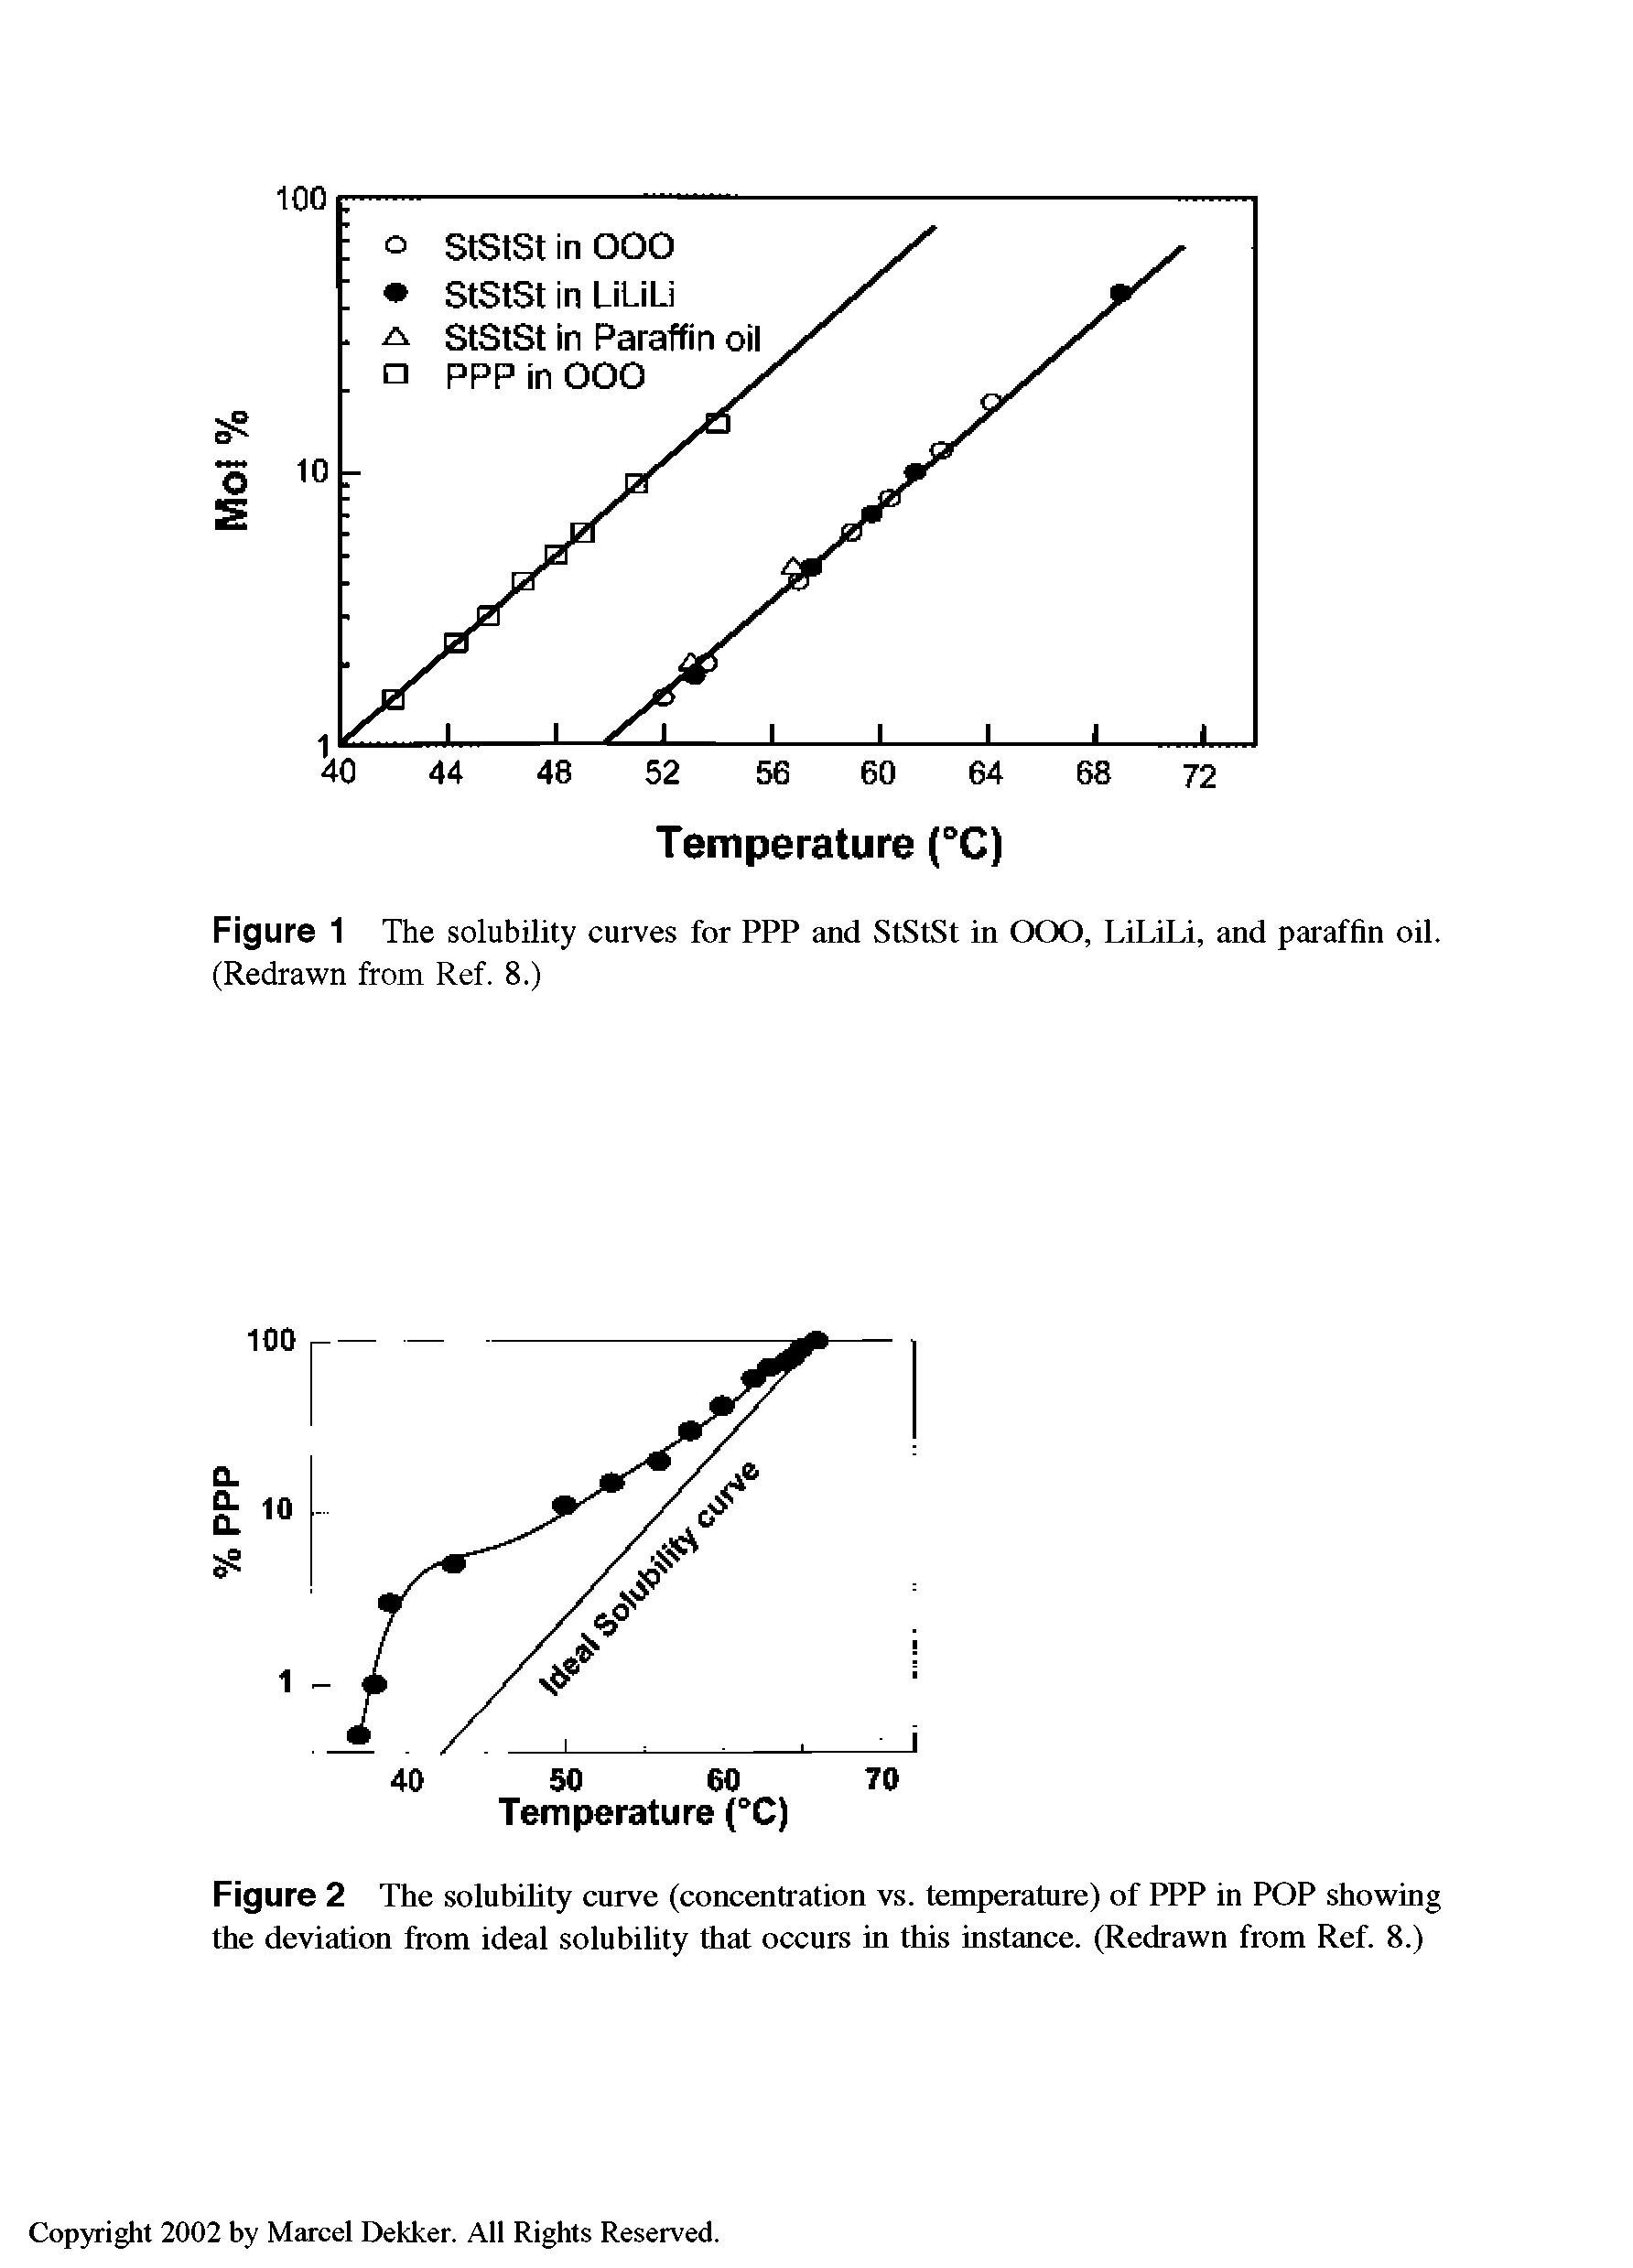 Figure 2 The solubility curve (concentration vs. temperature) of PPP in POP showing the deviation from ideal solubility that occurs in this instance. (Redrawn from Ref. 8.)...